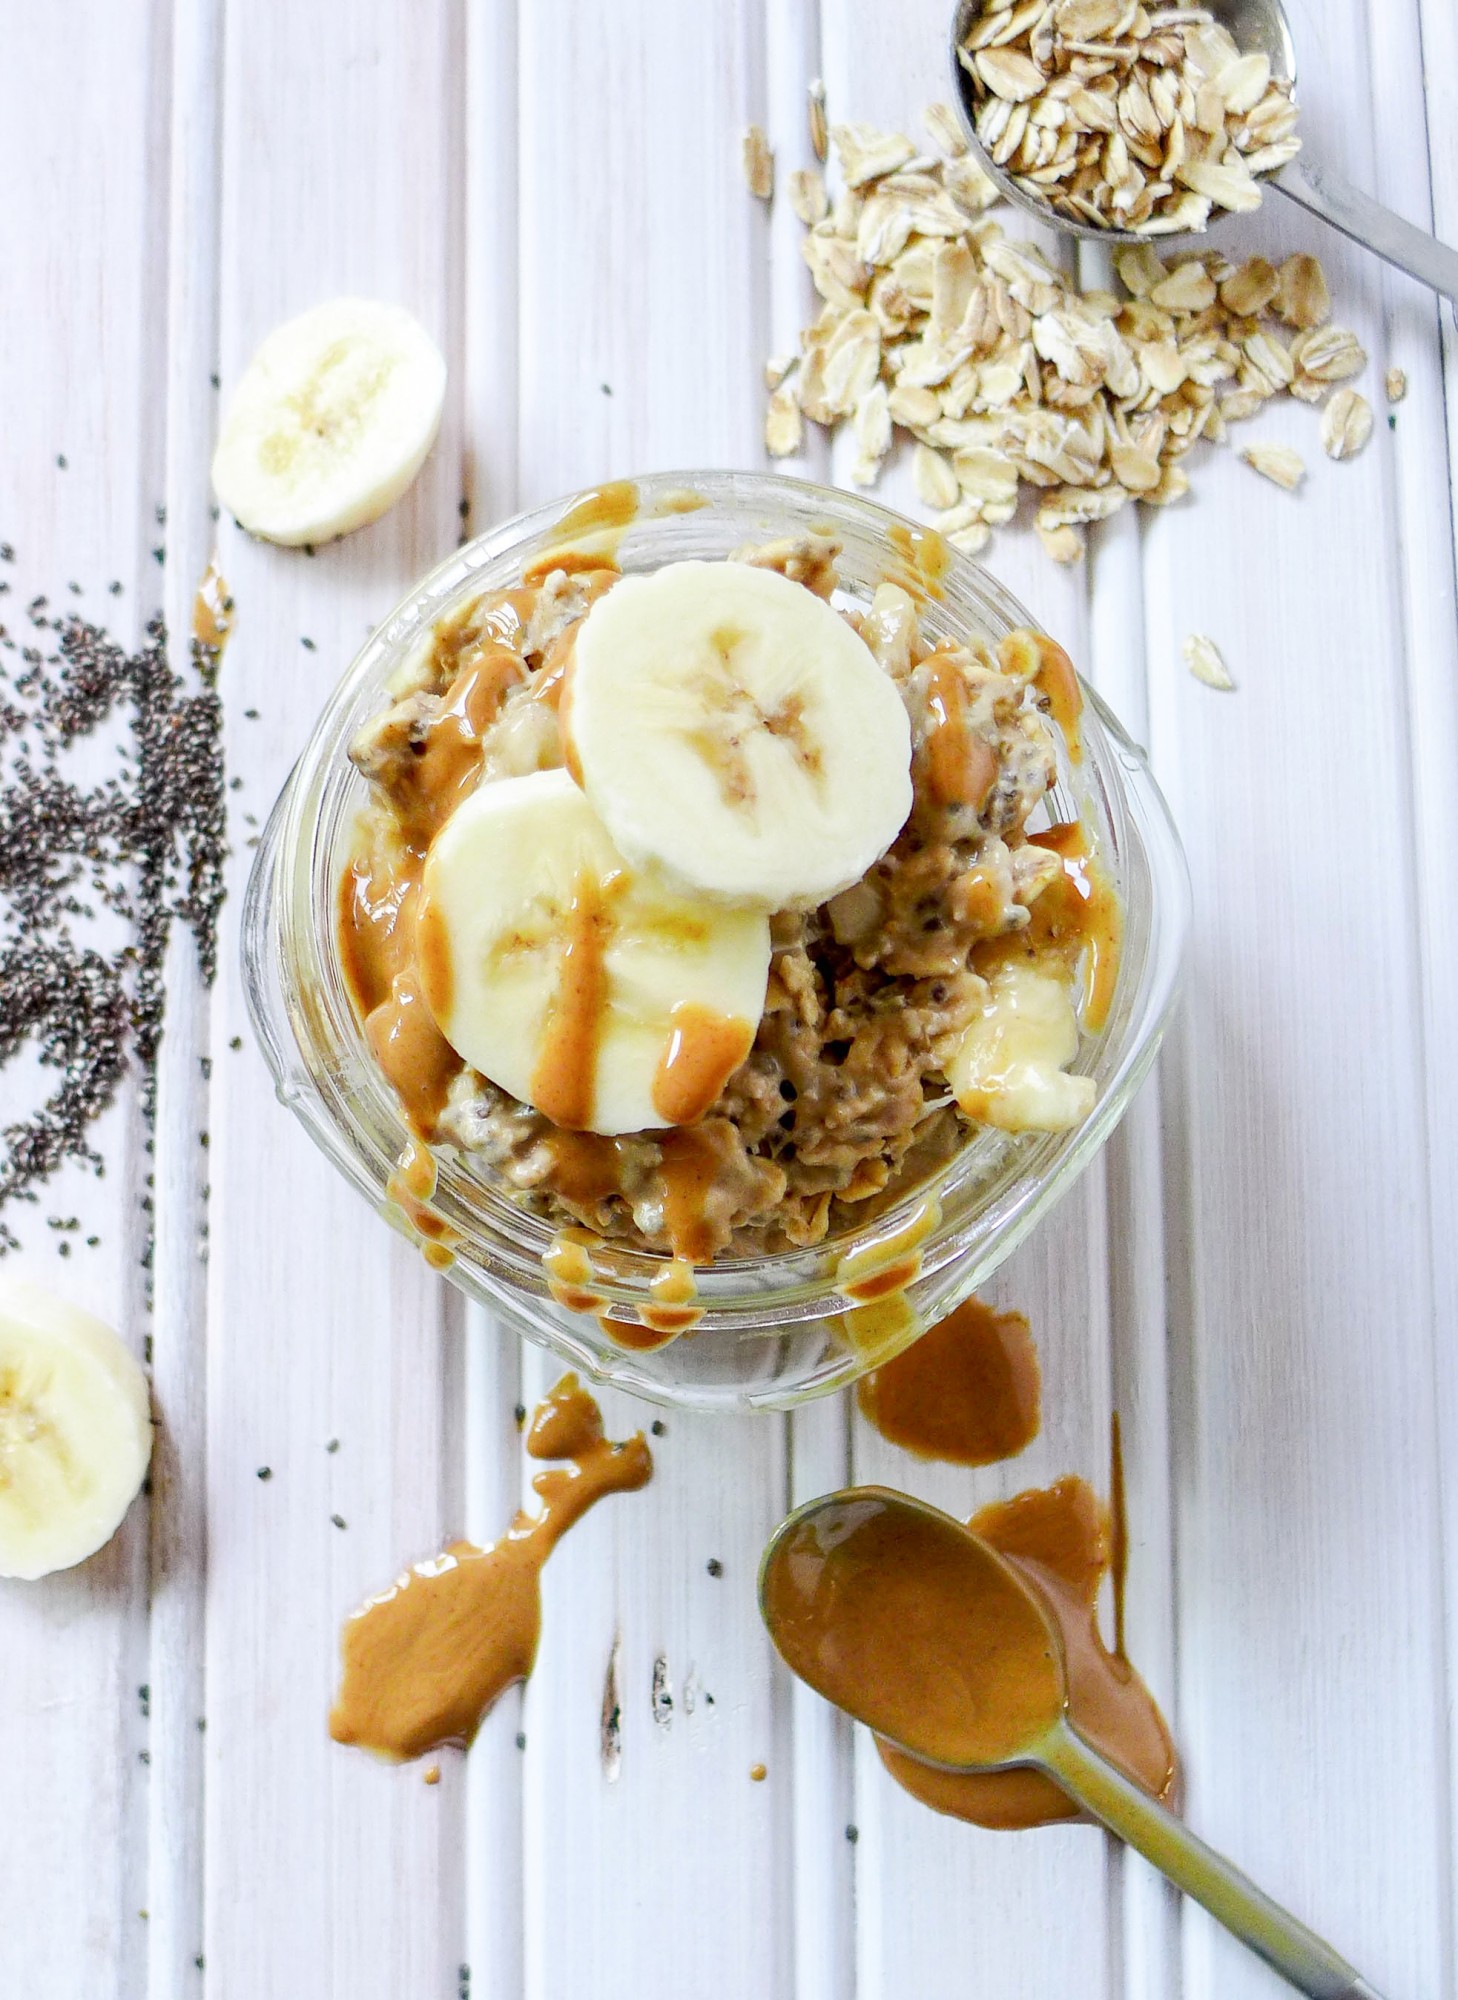 Too Busy For Breakfast? These Overnight Oats Recipes Are Game – Tone Up